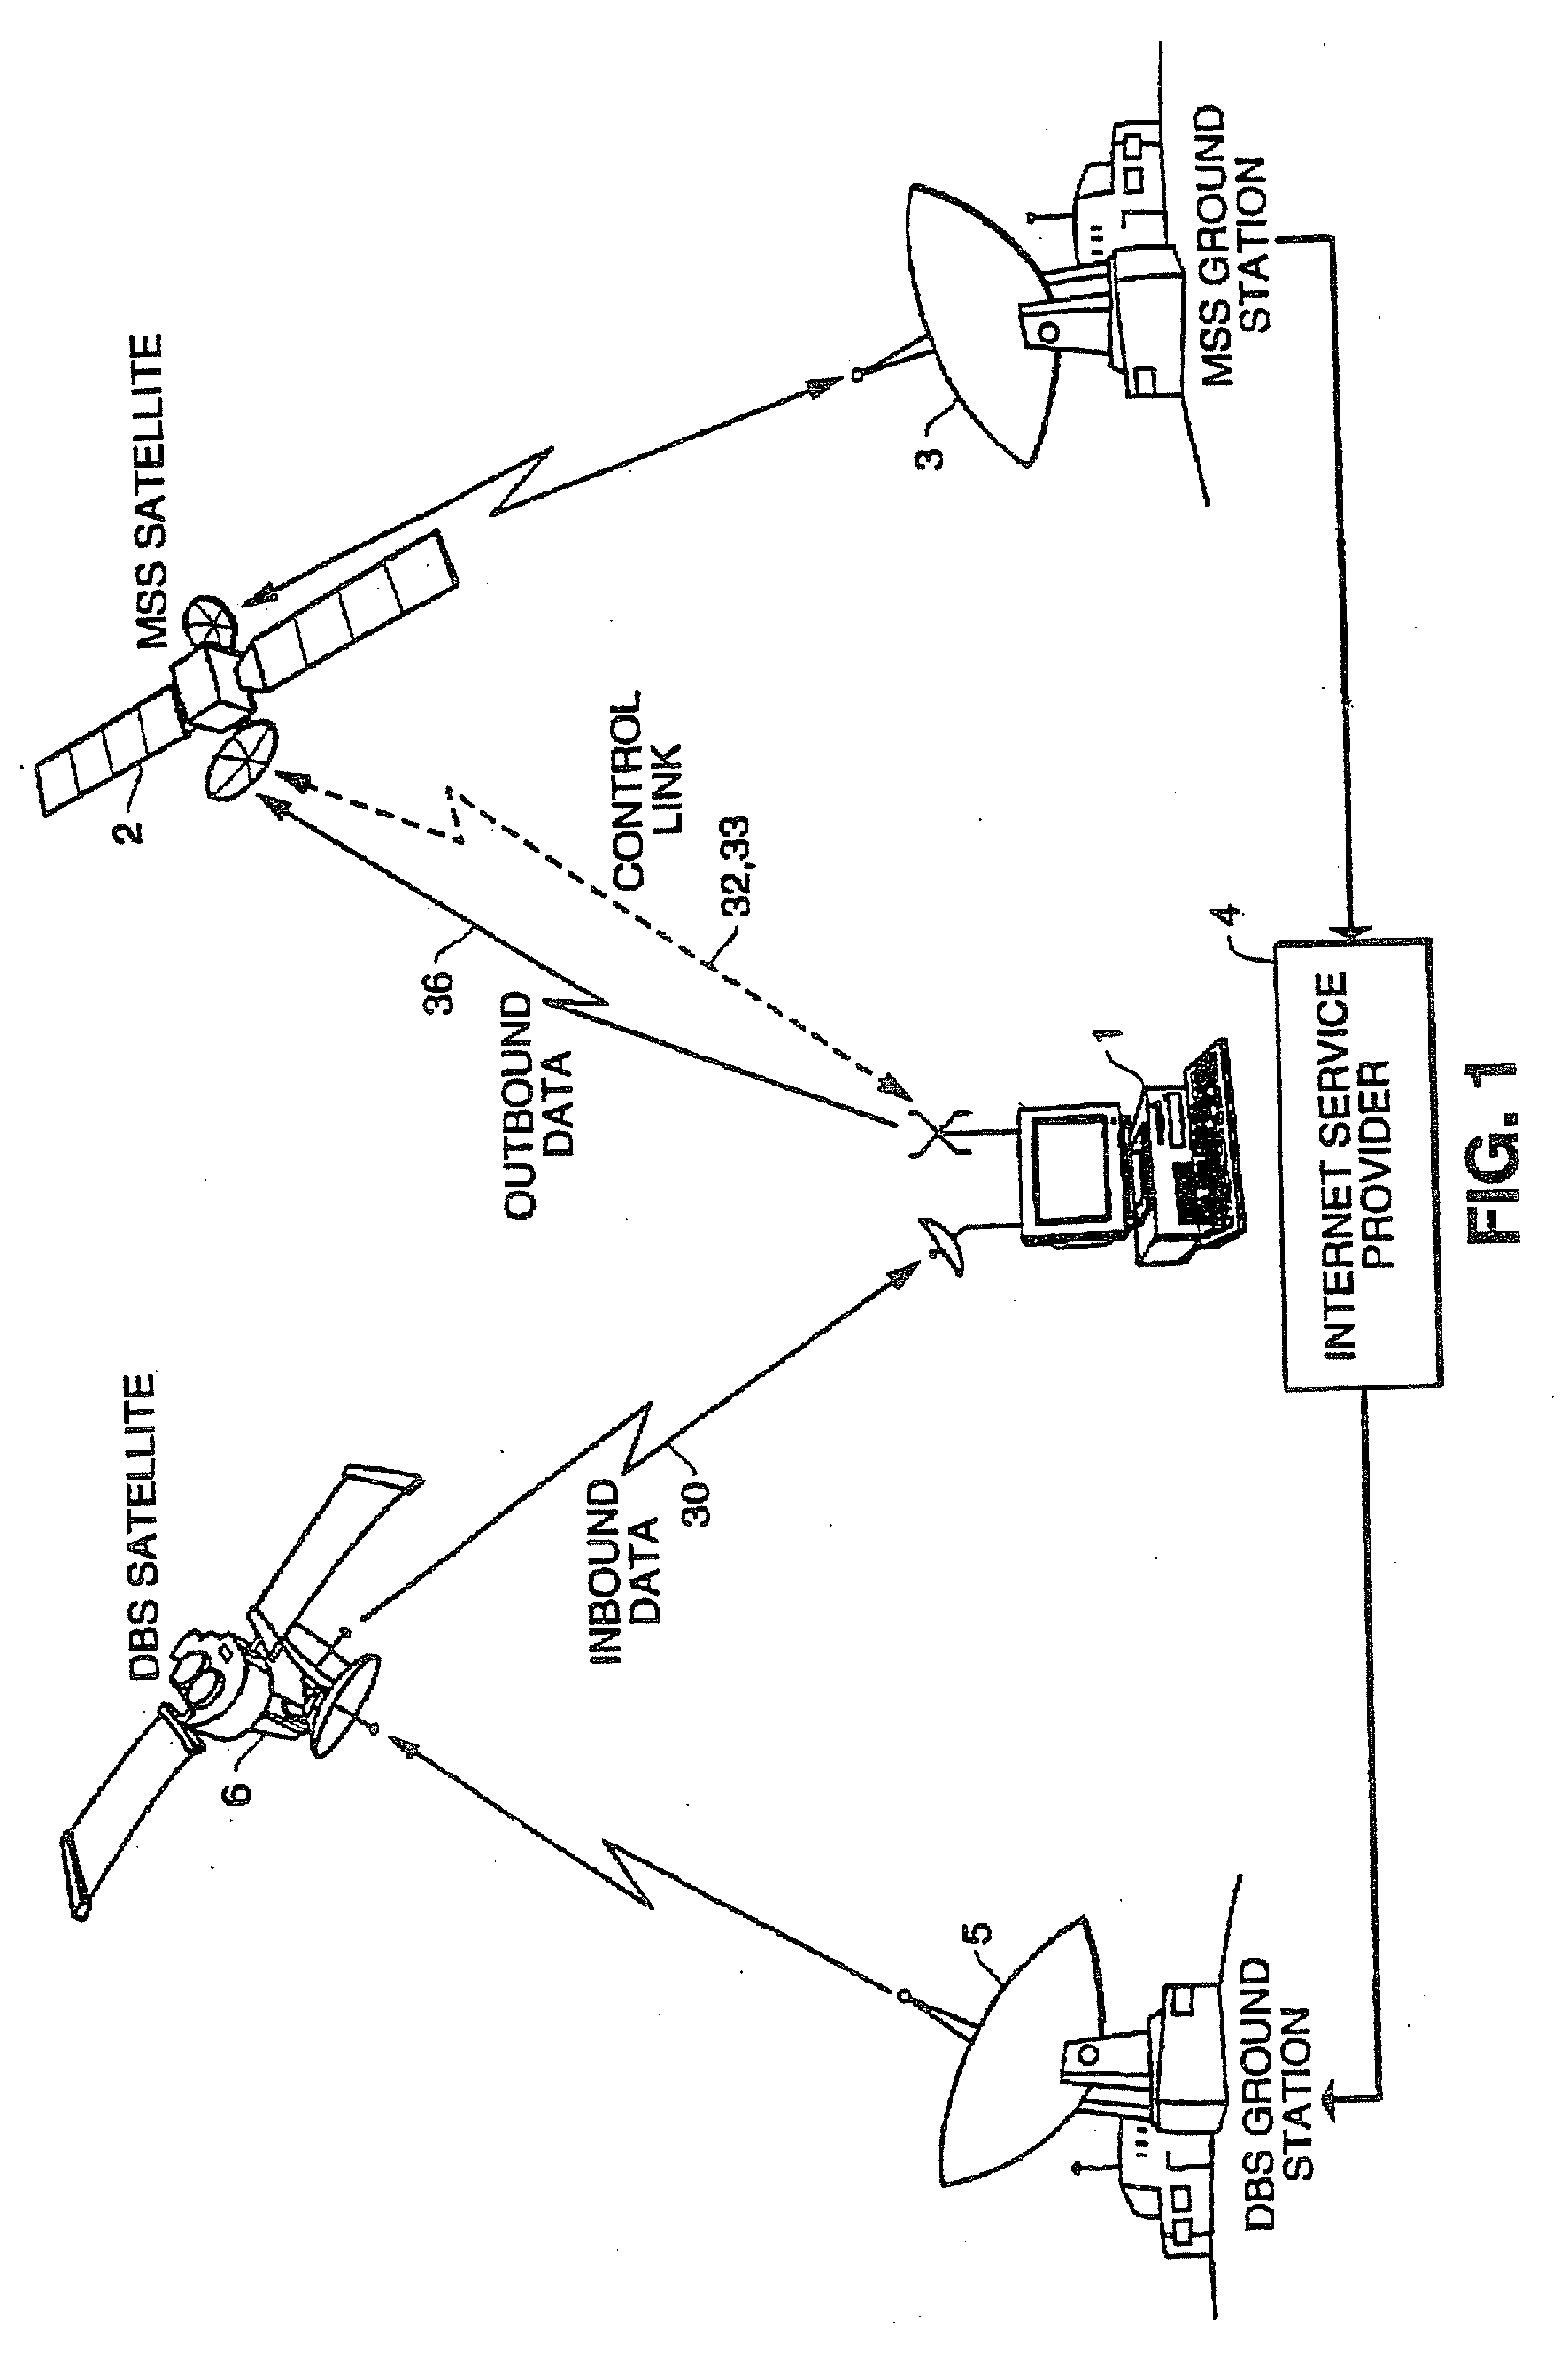 Internet communications systems and methods using different wireless links for inbound and outbound data